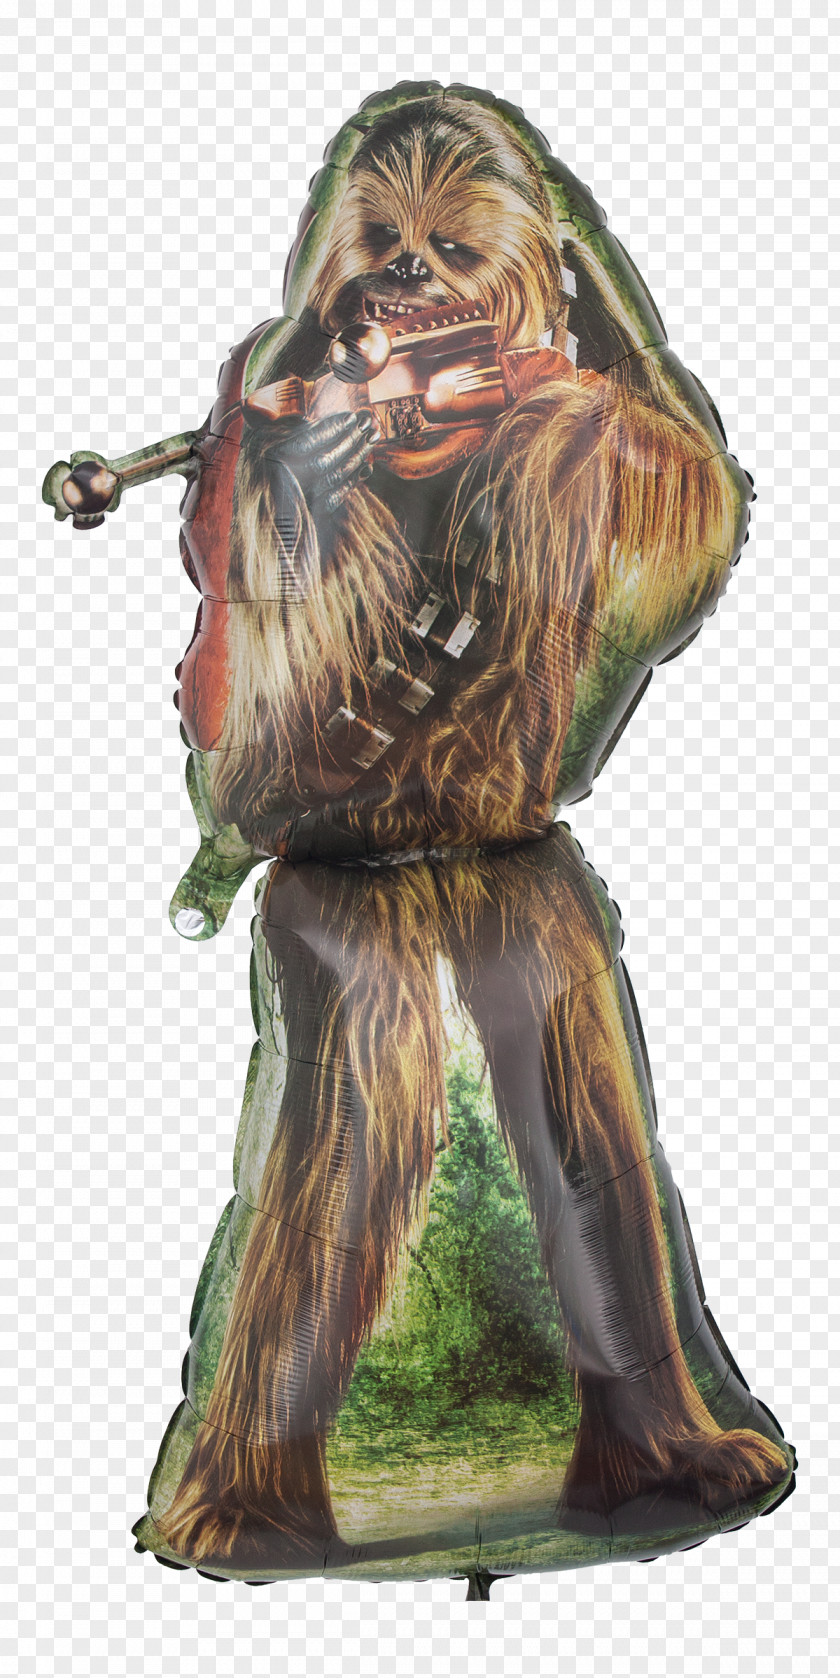 Star Wars Chewbacca Toy Balloon Figurine Foil PNG